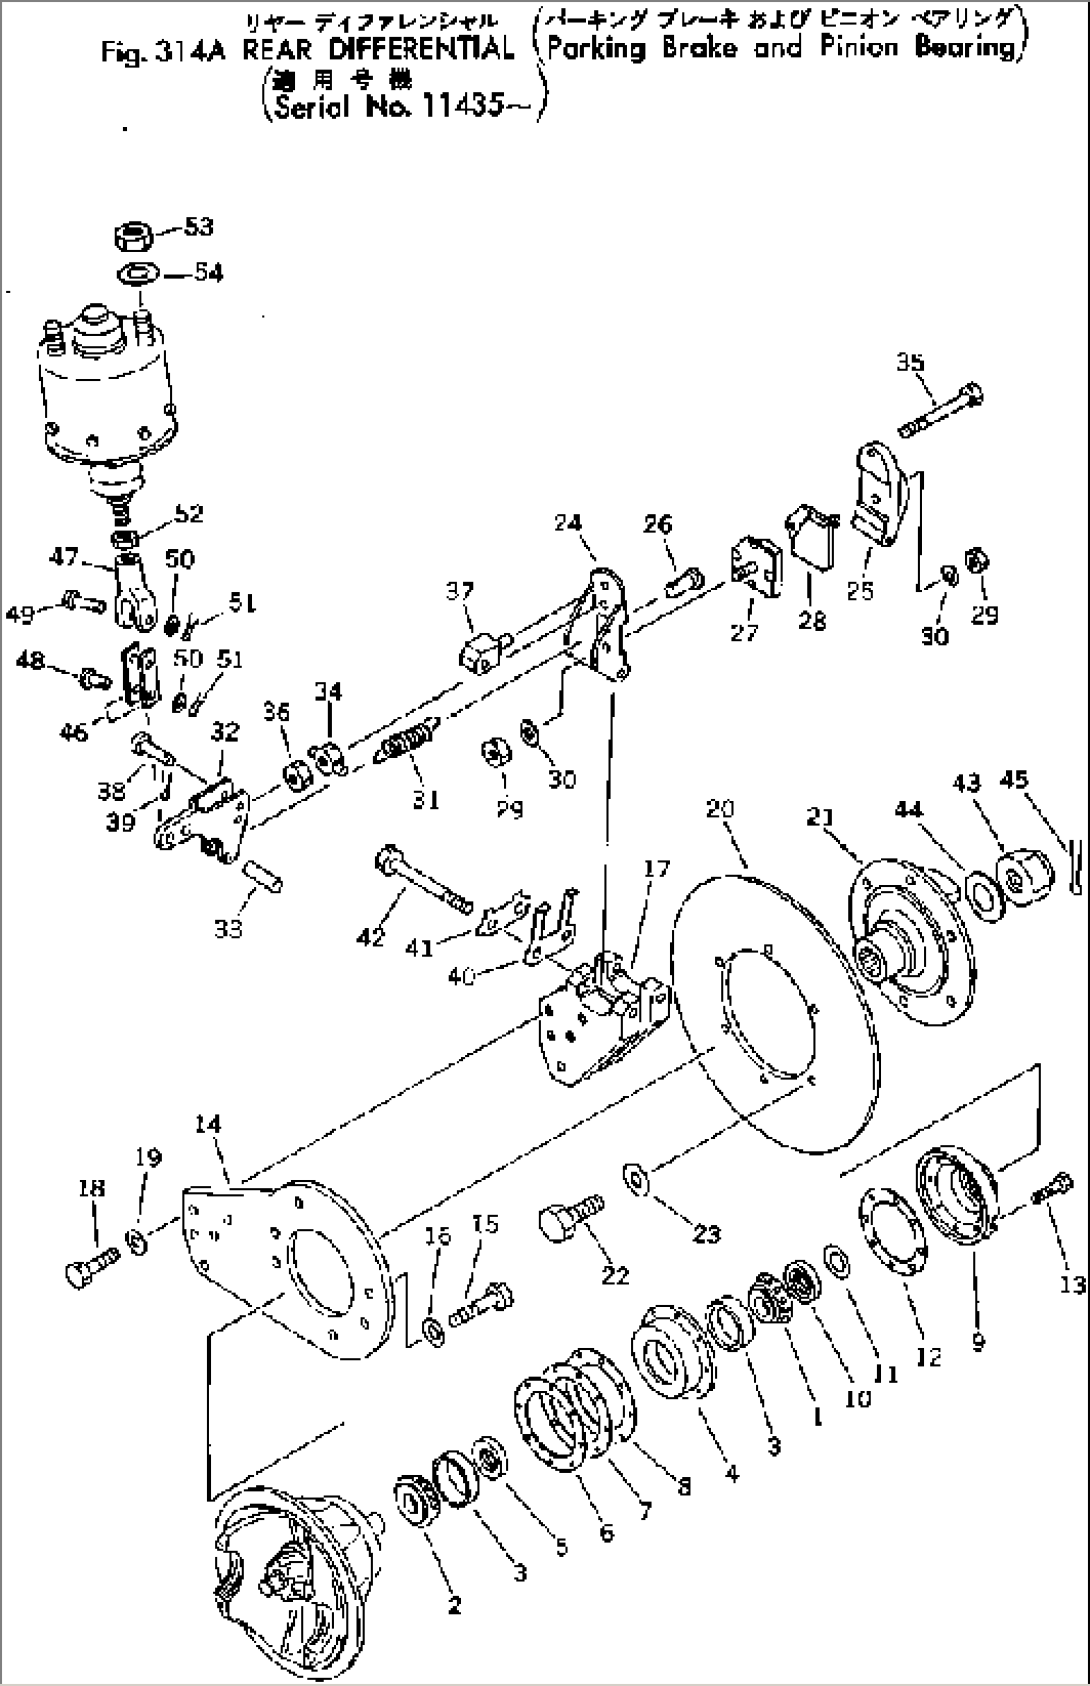 REAR DIFFERENTIAL (PARKING BRAKE AND PINION BEARING)(#11435-)